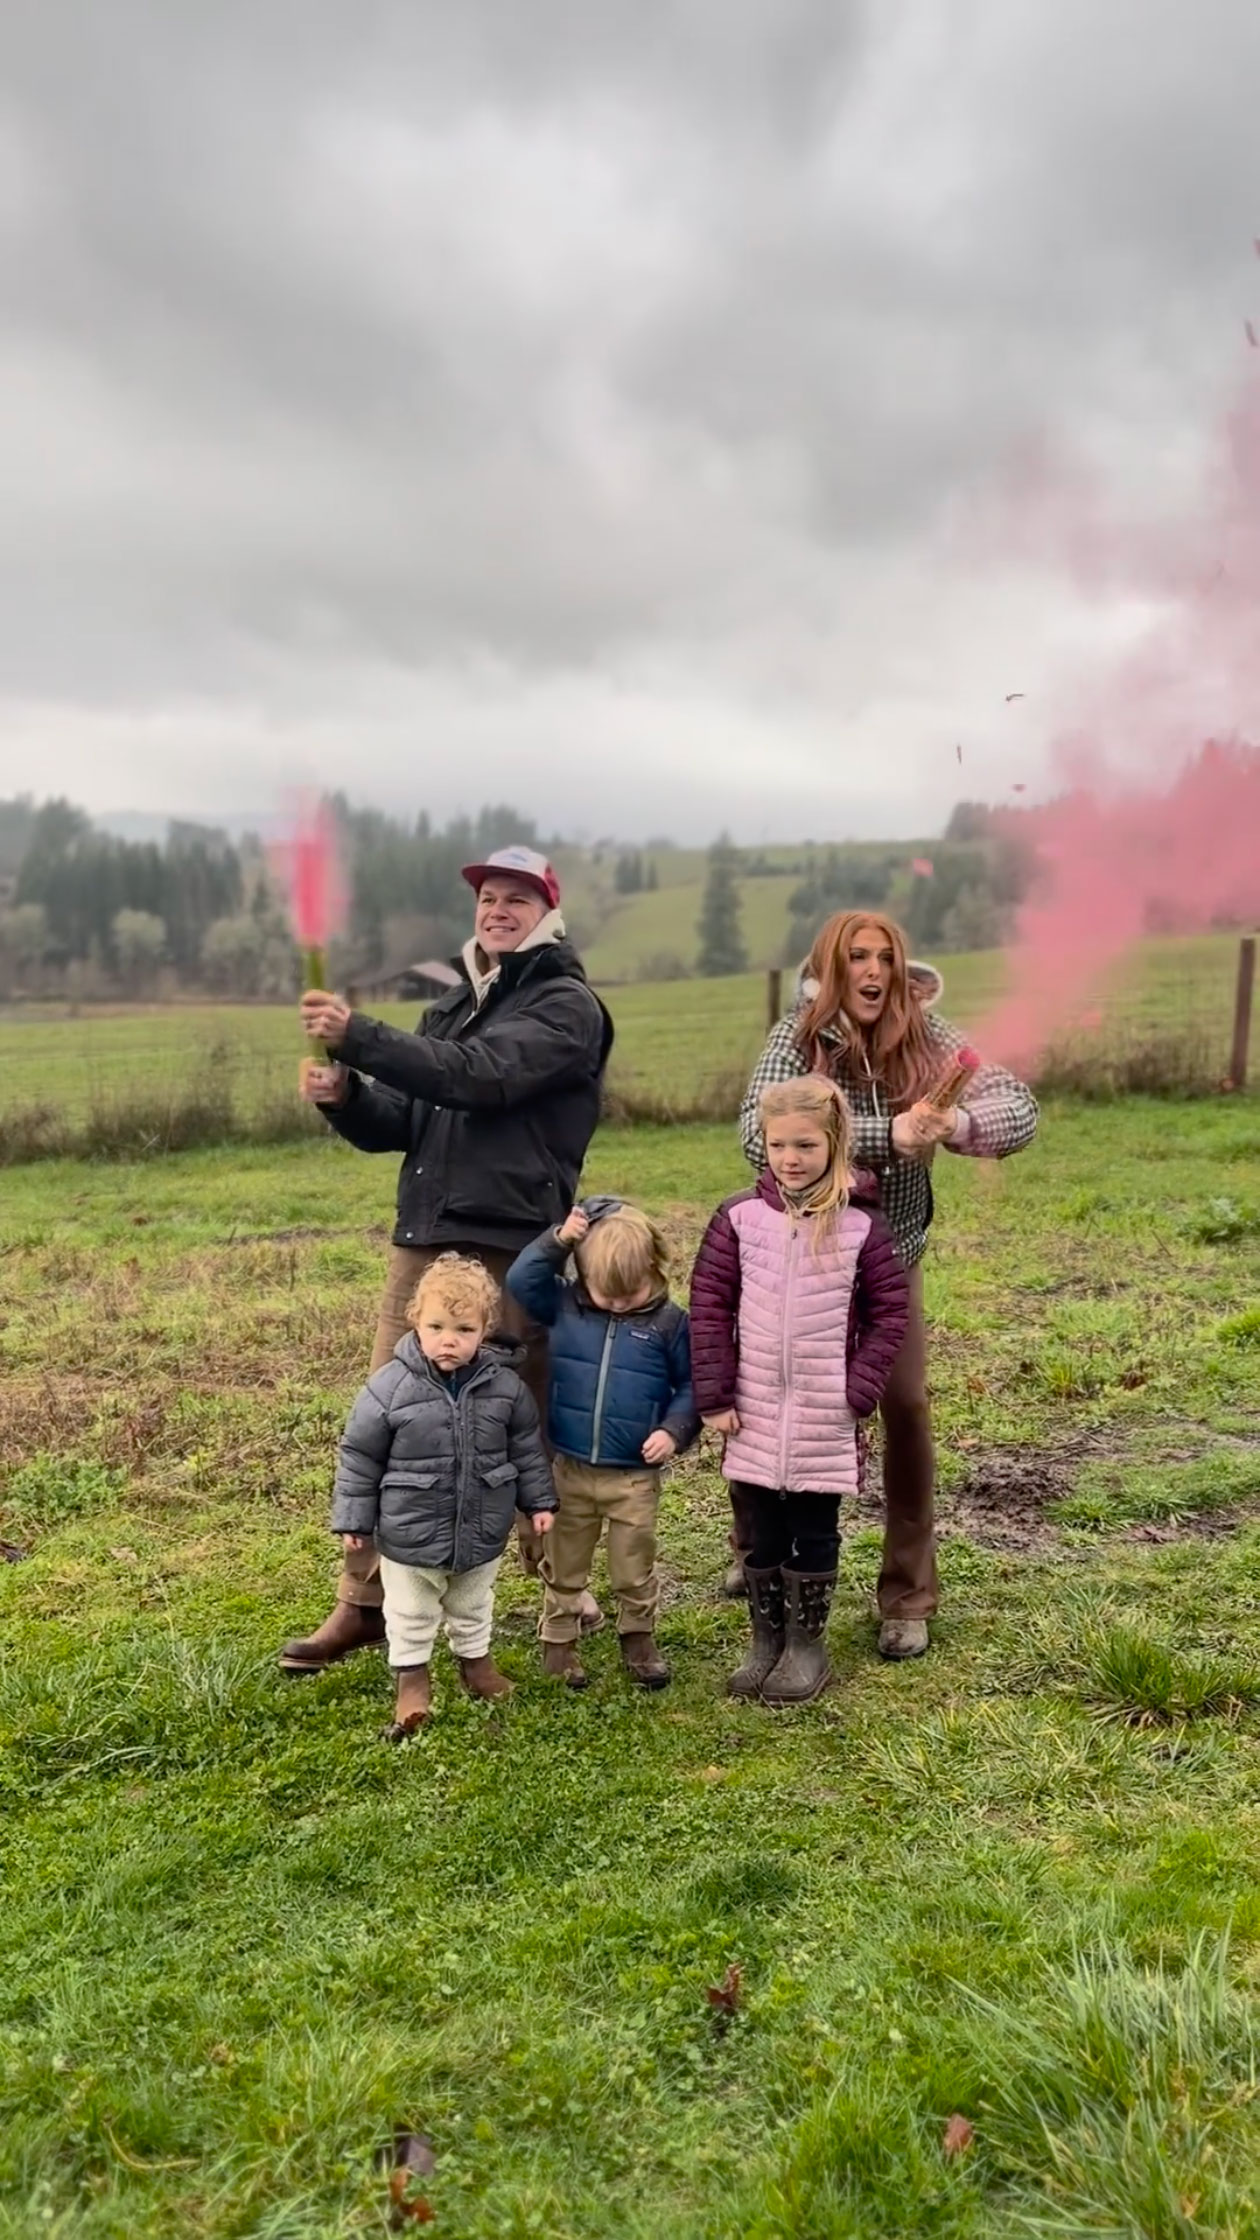 The TLC alum shared a gender reveal video to announce they were expecting a baby girl